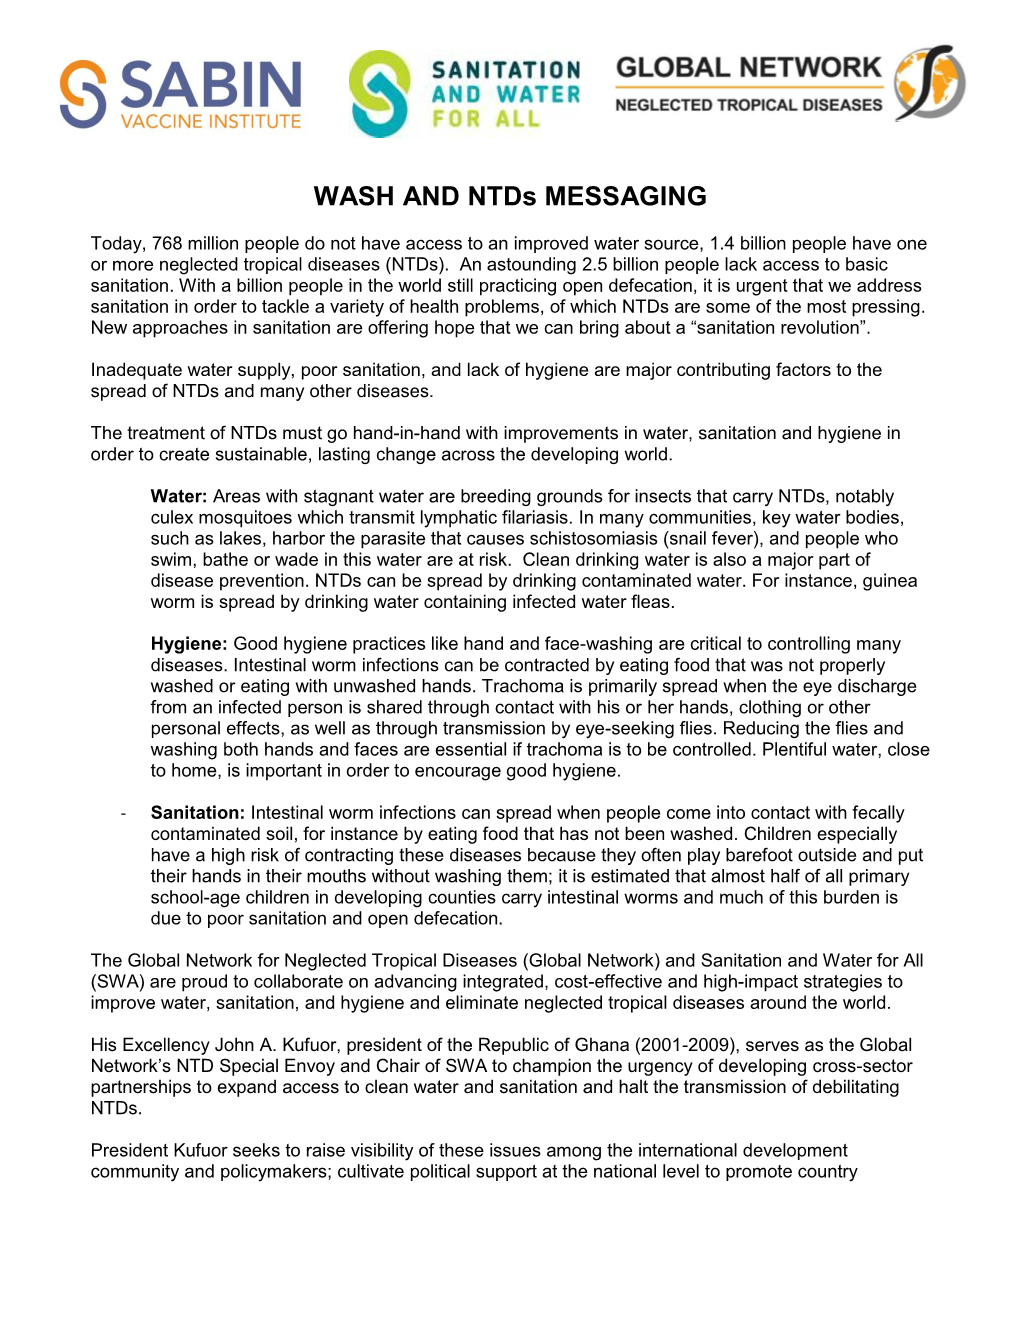 SWA & Global Networks Joint Message on WASH and Ntds